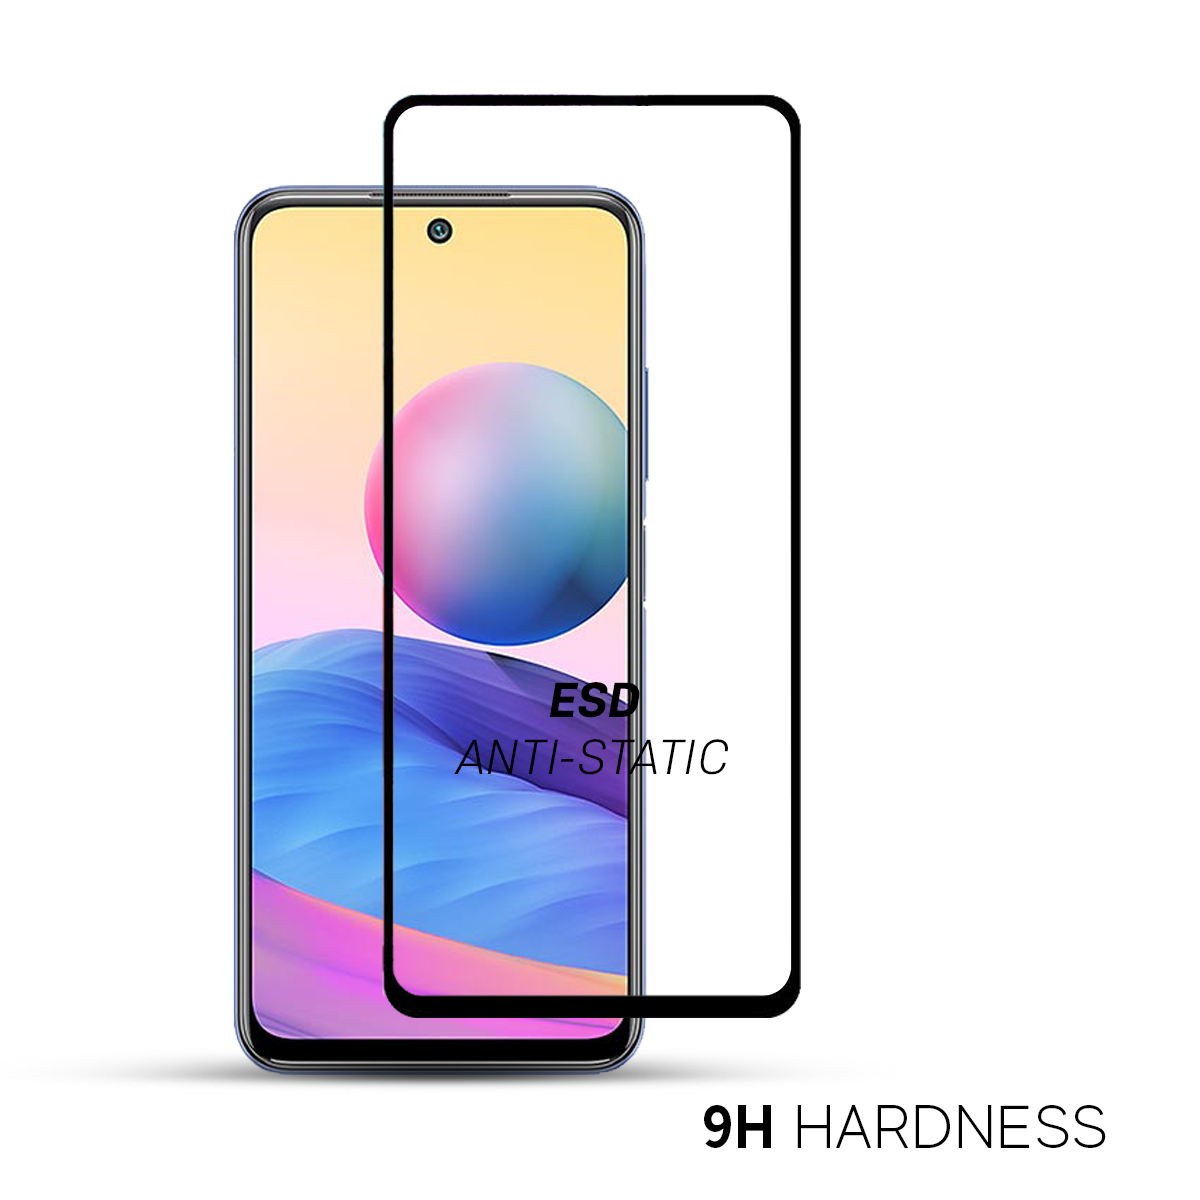 Beyox ESD Anti Static 5D Glass for Redmi Note 9 Pro Max